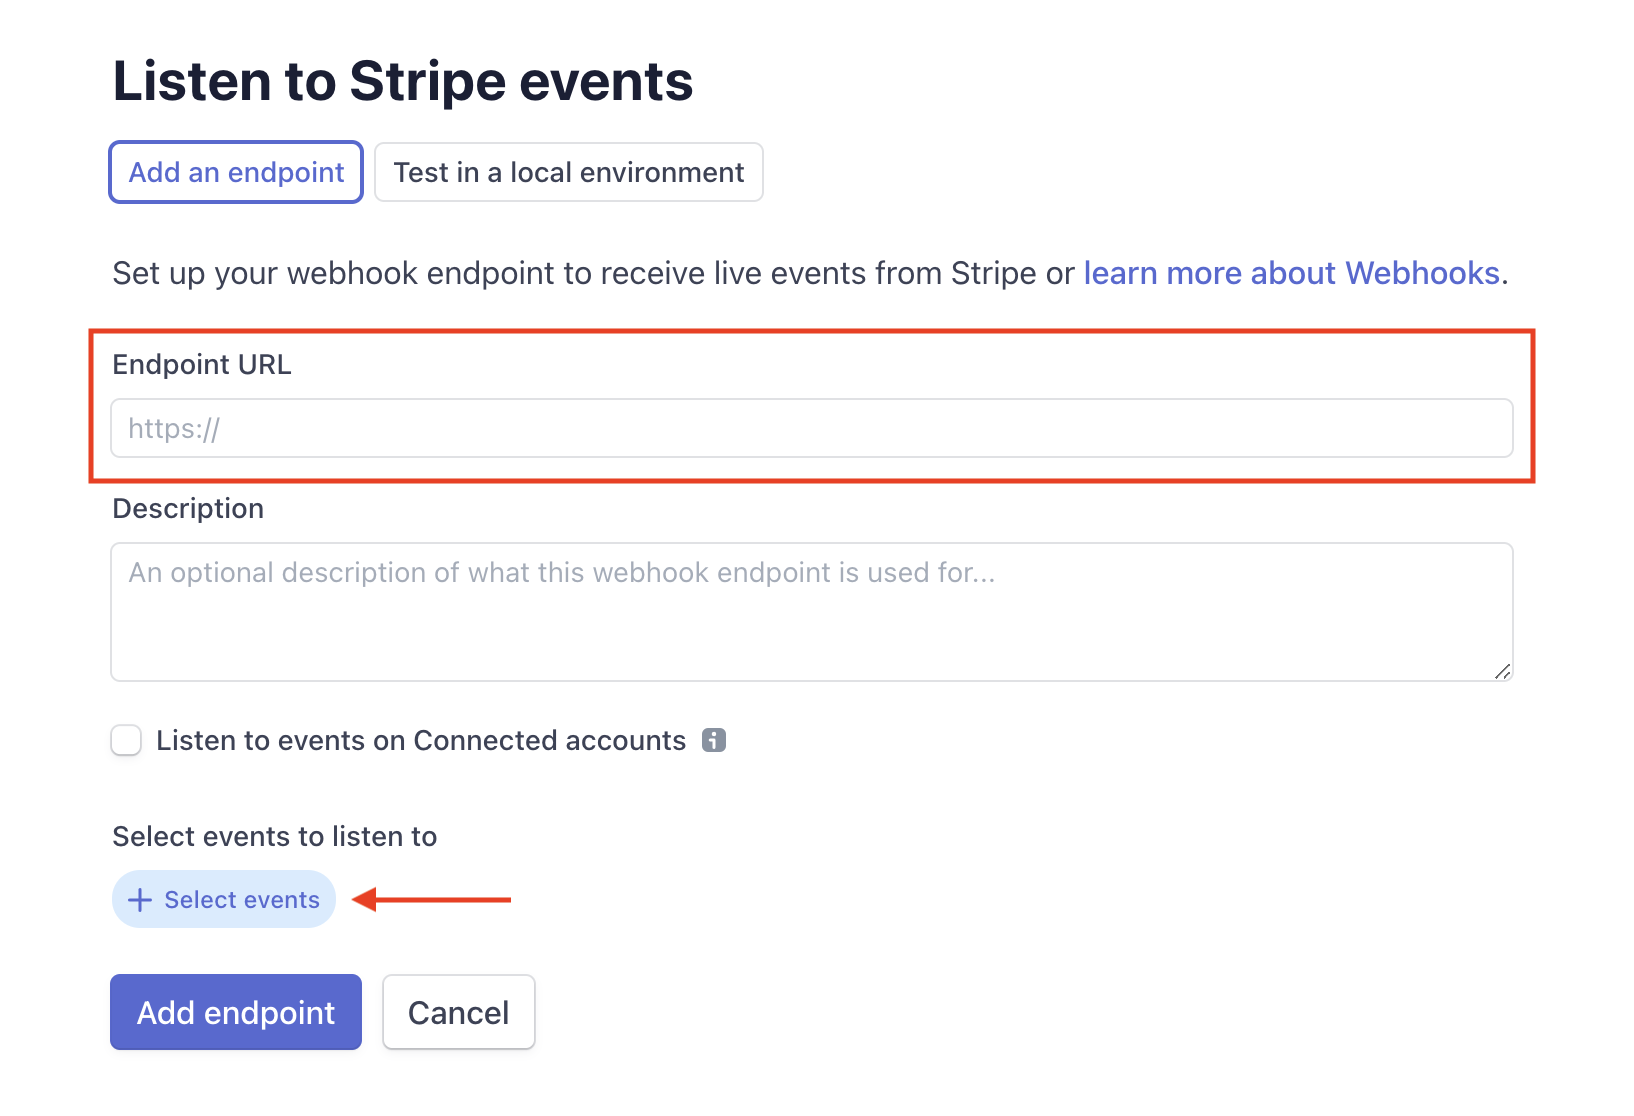 Add Endpoint URL and select events